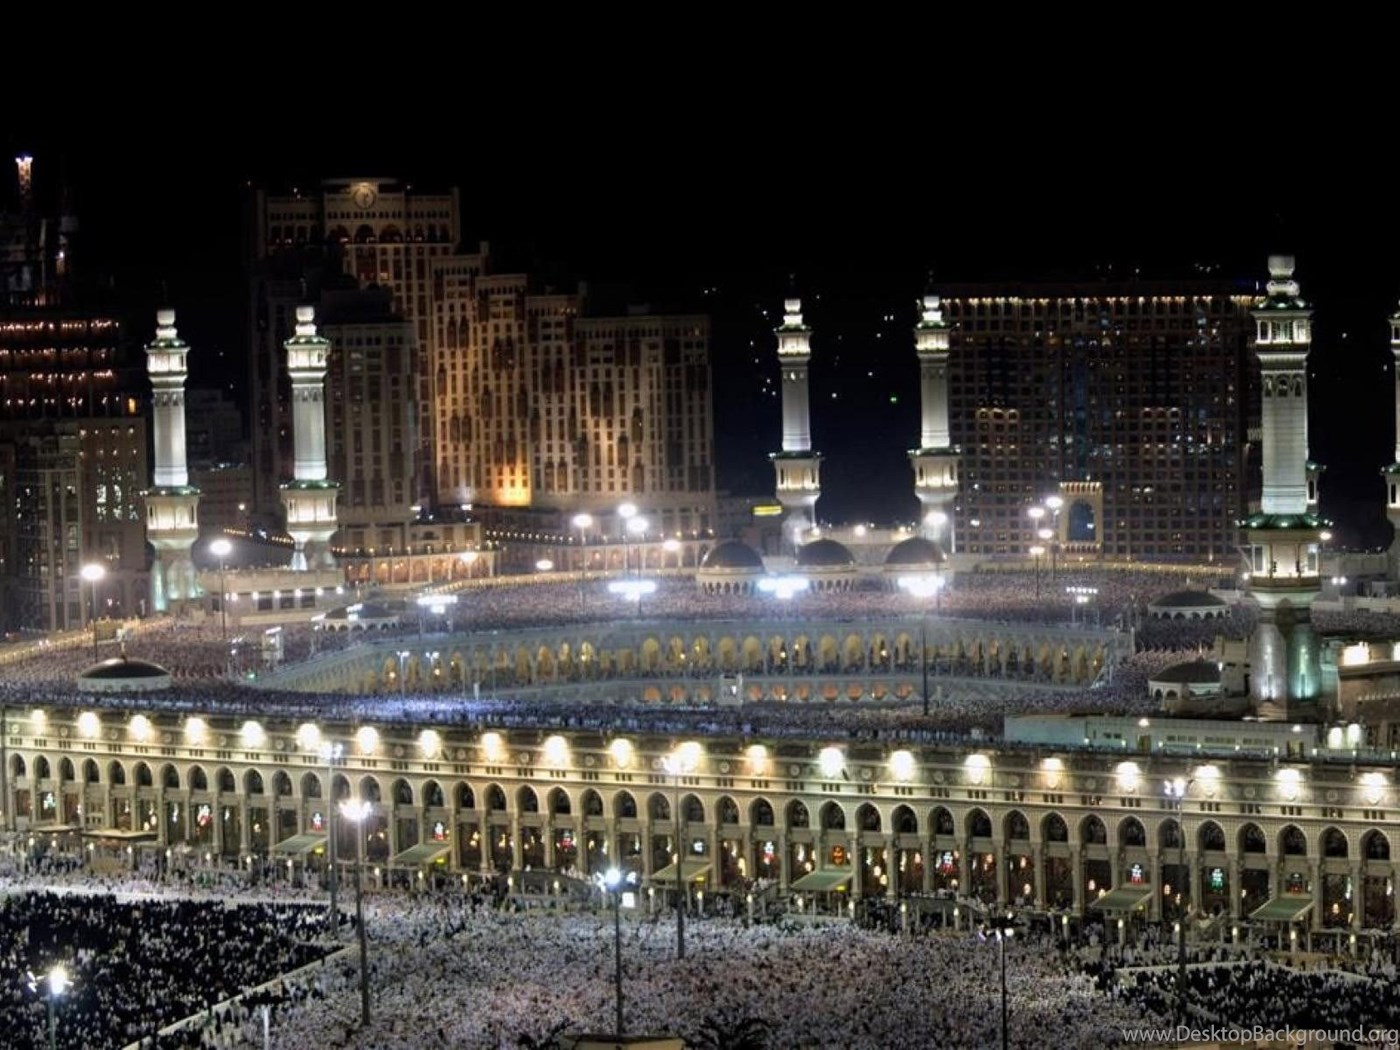 Kaabah And Masjid Wallpapers 4 K For Pc - 350 Mosque Pictures Hd Download Free Images On ...